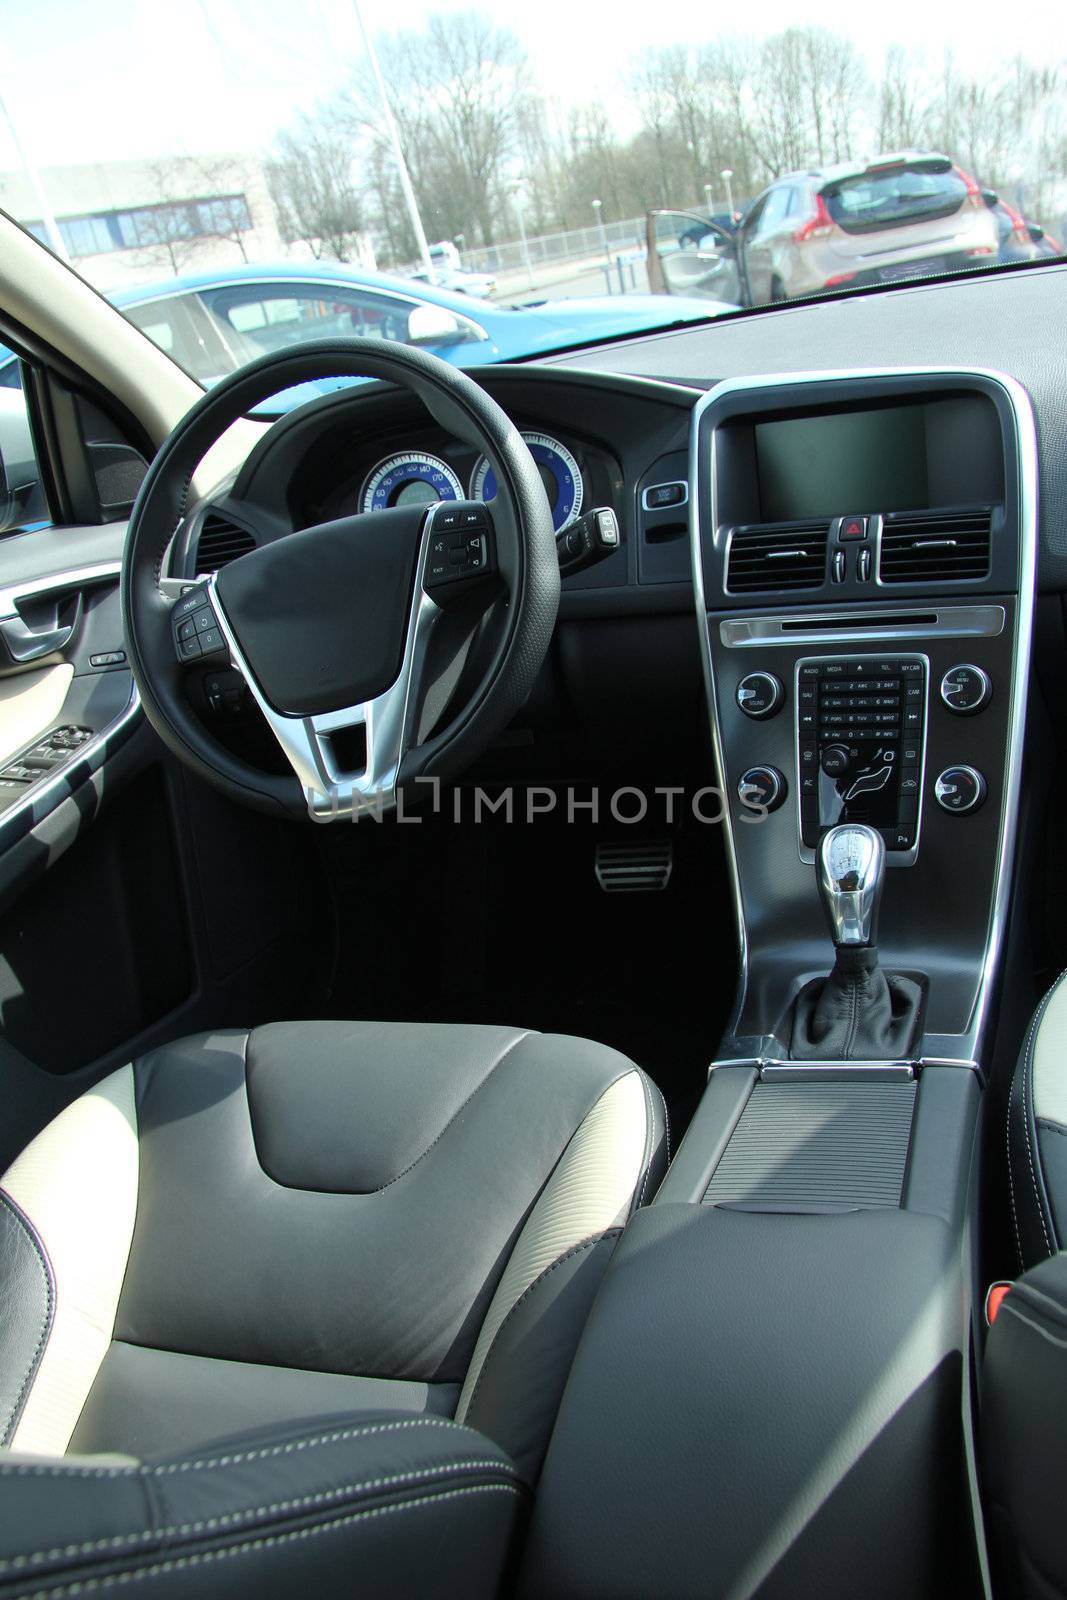 Dashboard and interior of a brand new car, leather and stainless steel